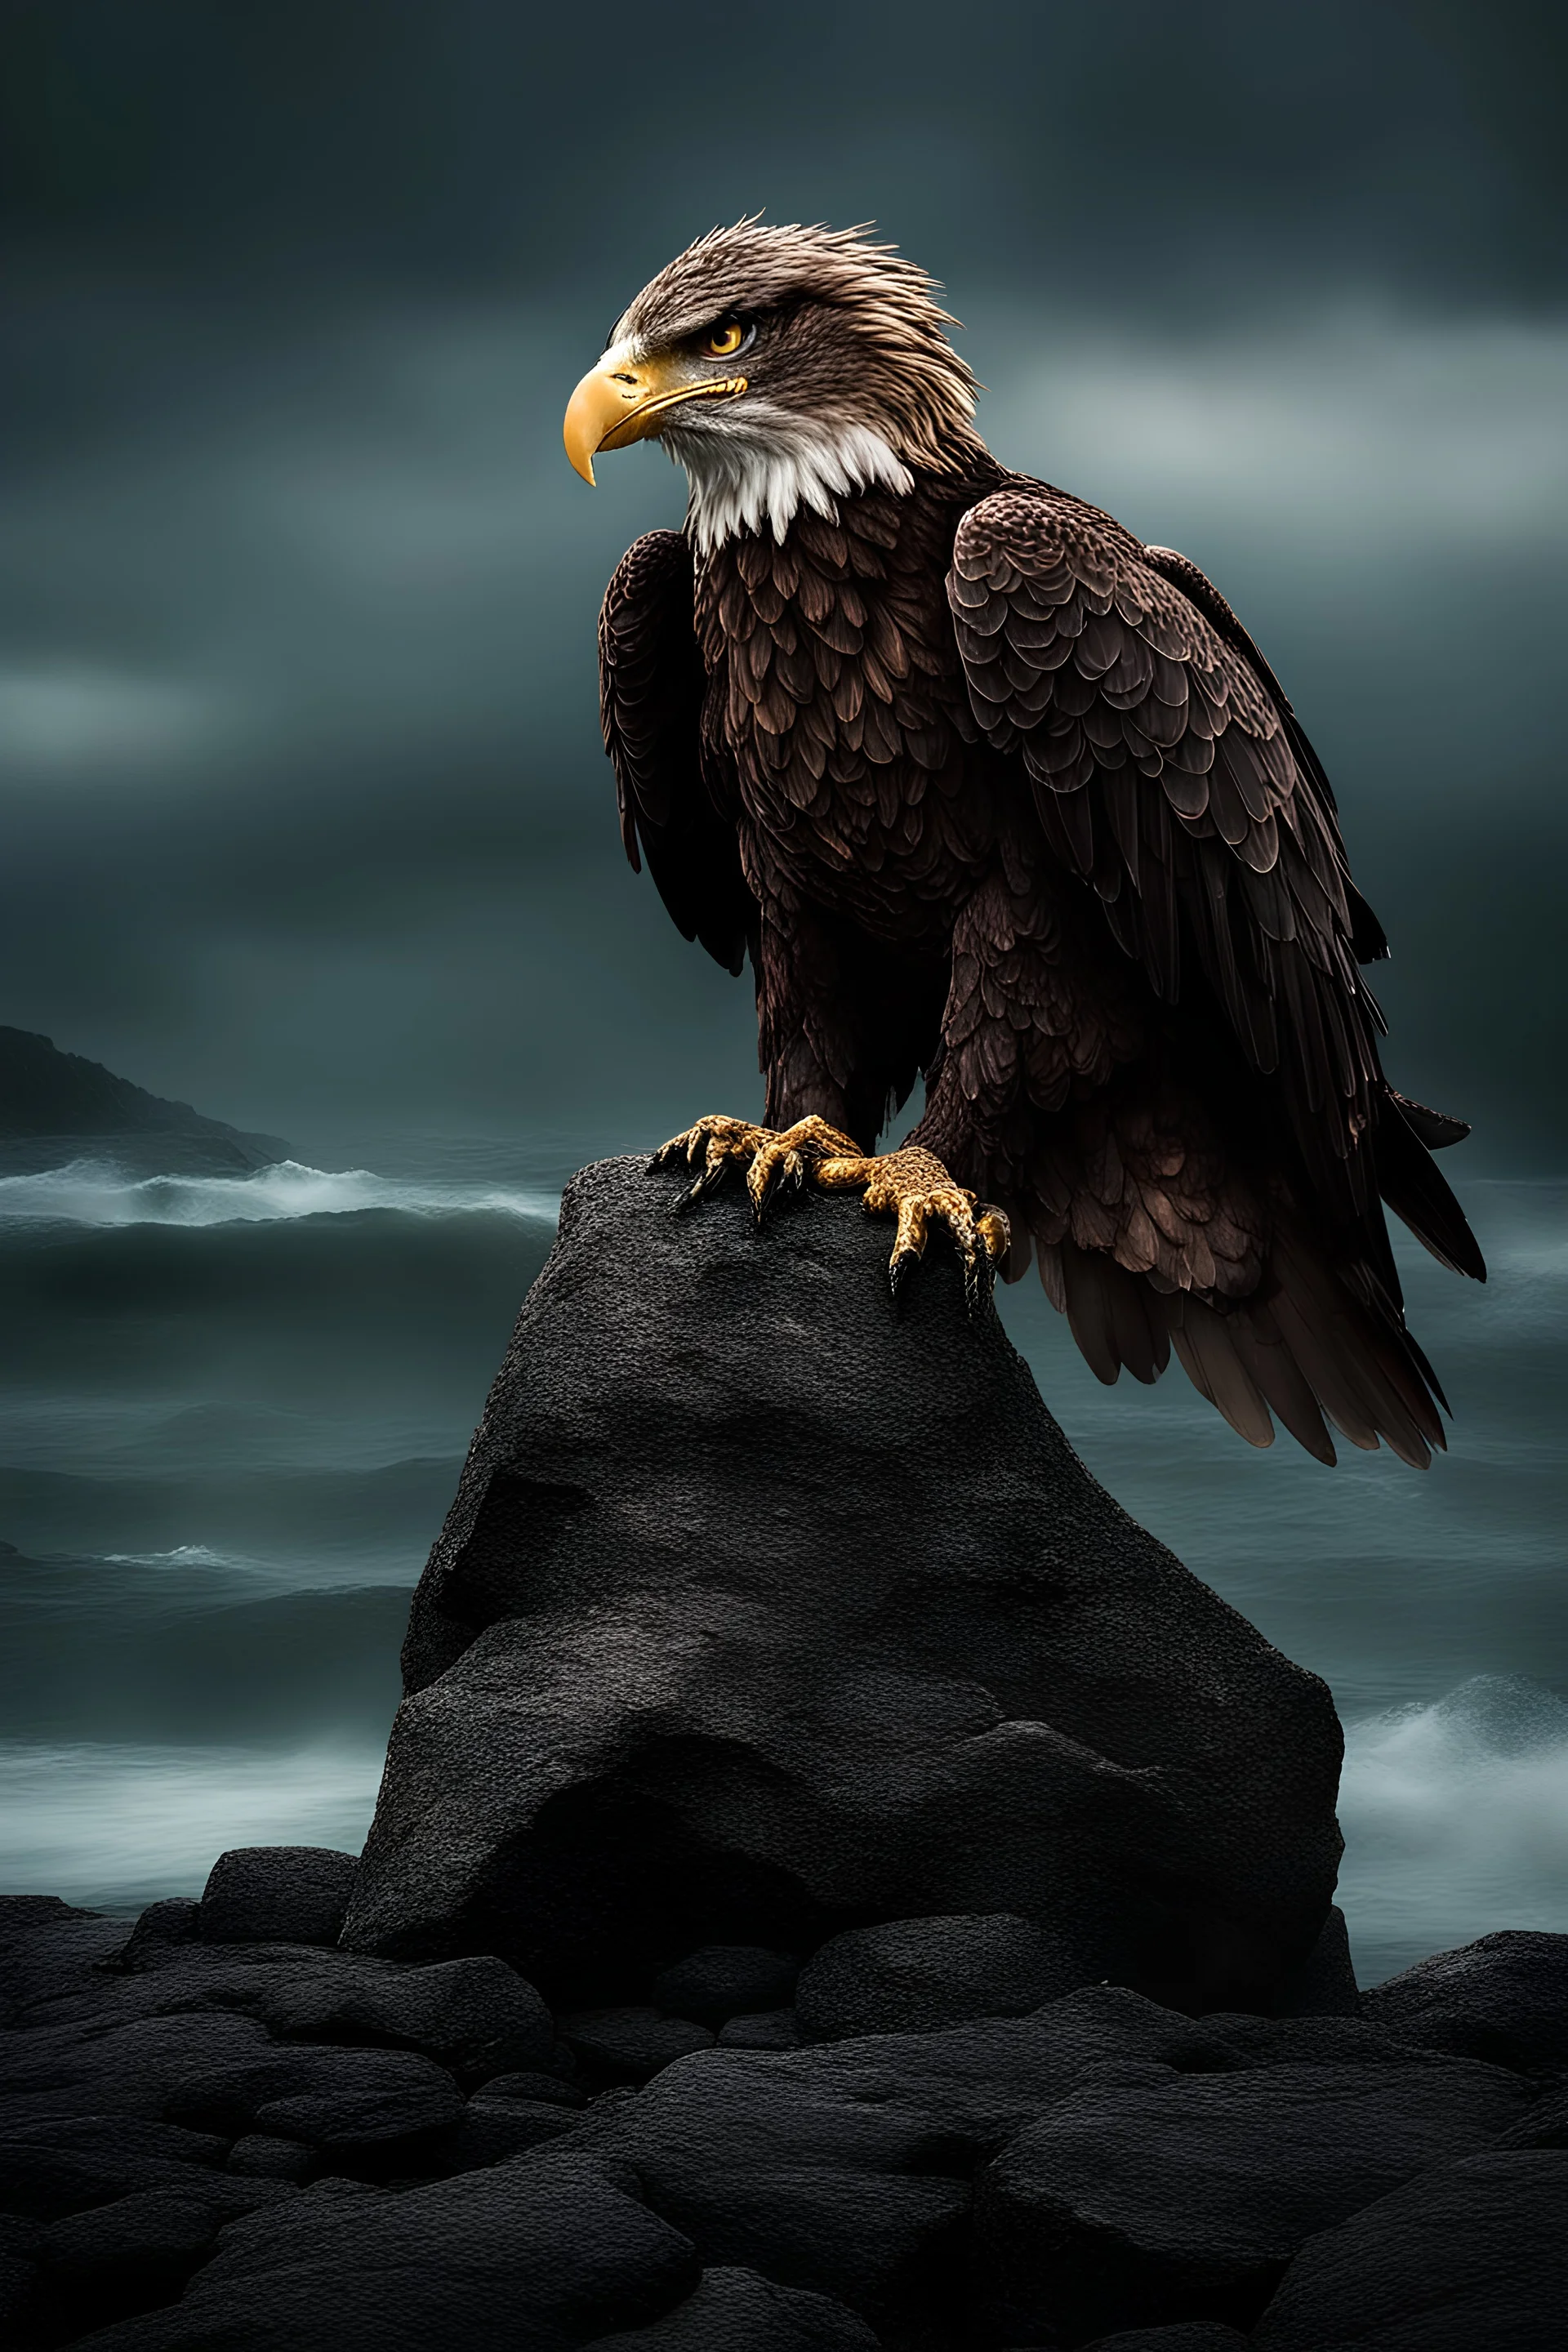 chained to a rock Prometheus and eagles peck him, rocky seashore, epic lights, dark night and storm,